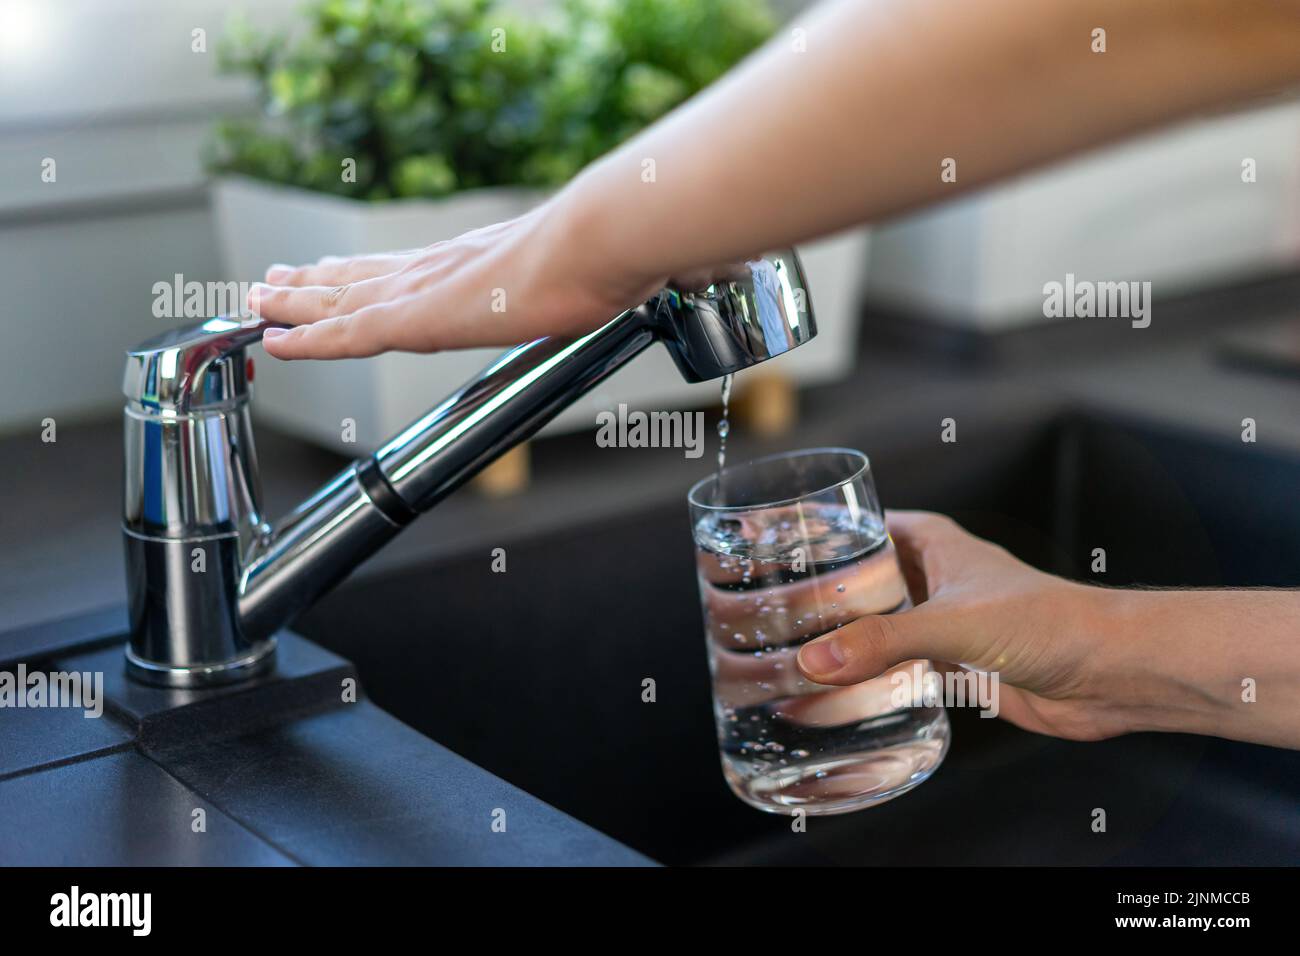 The woman's hand turns off the faucet in the kitchen. Stock Photo